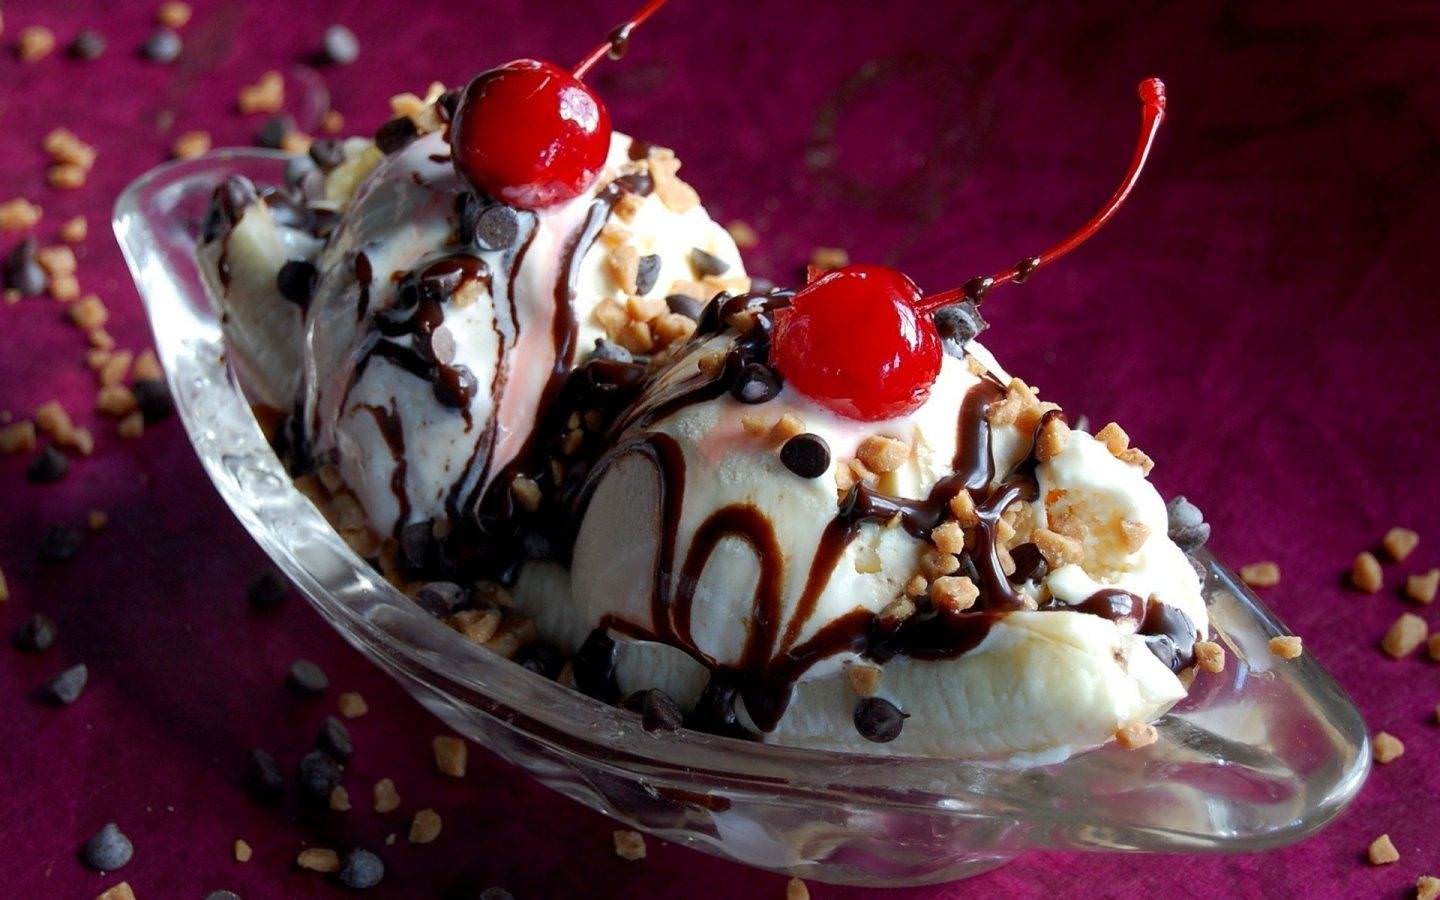 Ice cream full hd, hdtv, fhd, 1080p wallpapers hd, desktop backgrounds  1920x1080 downloads, images and pictures